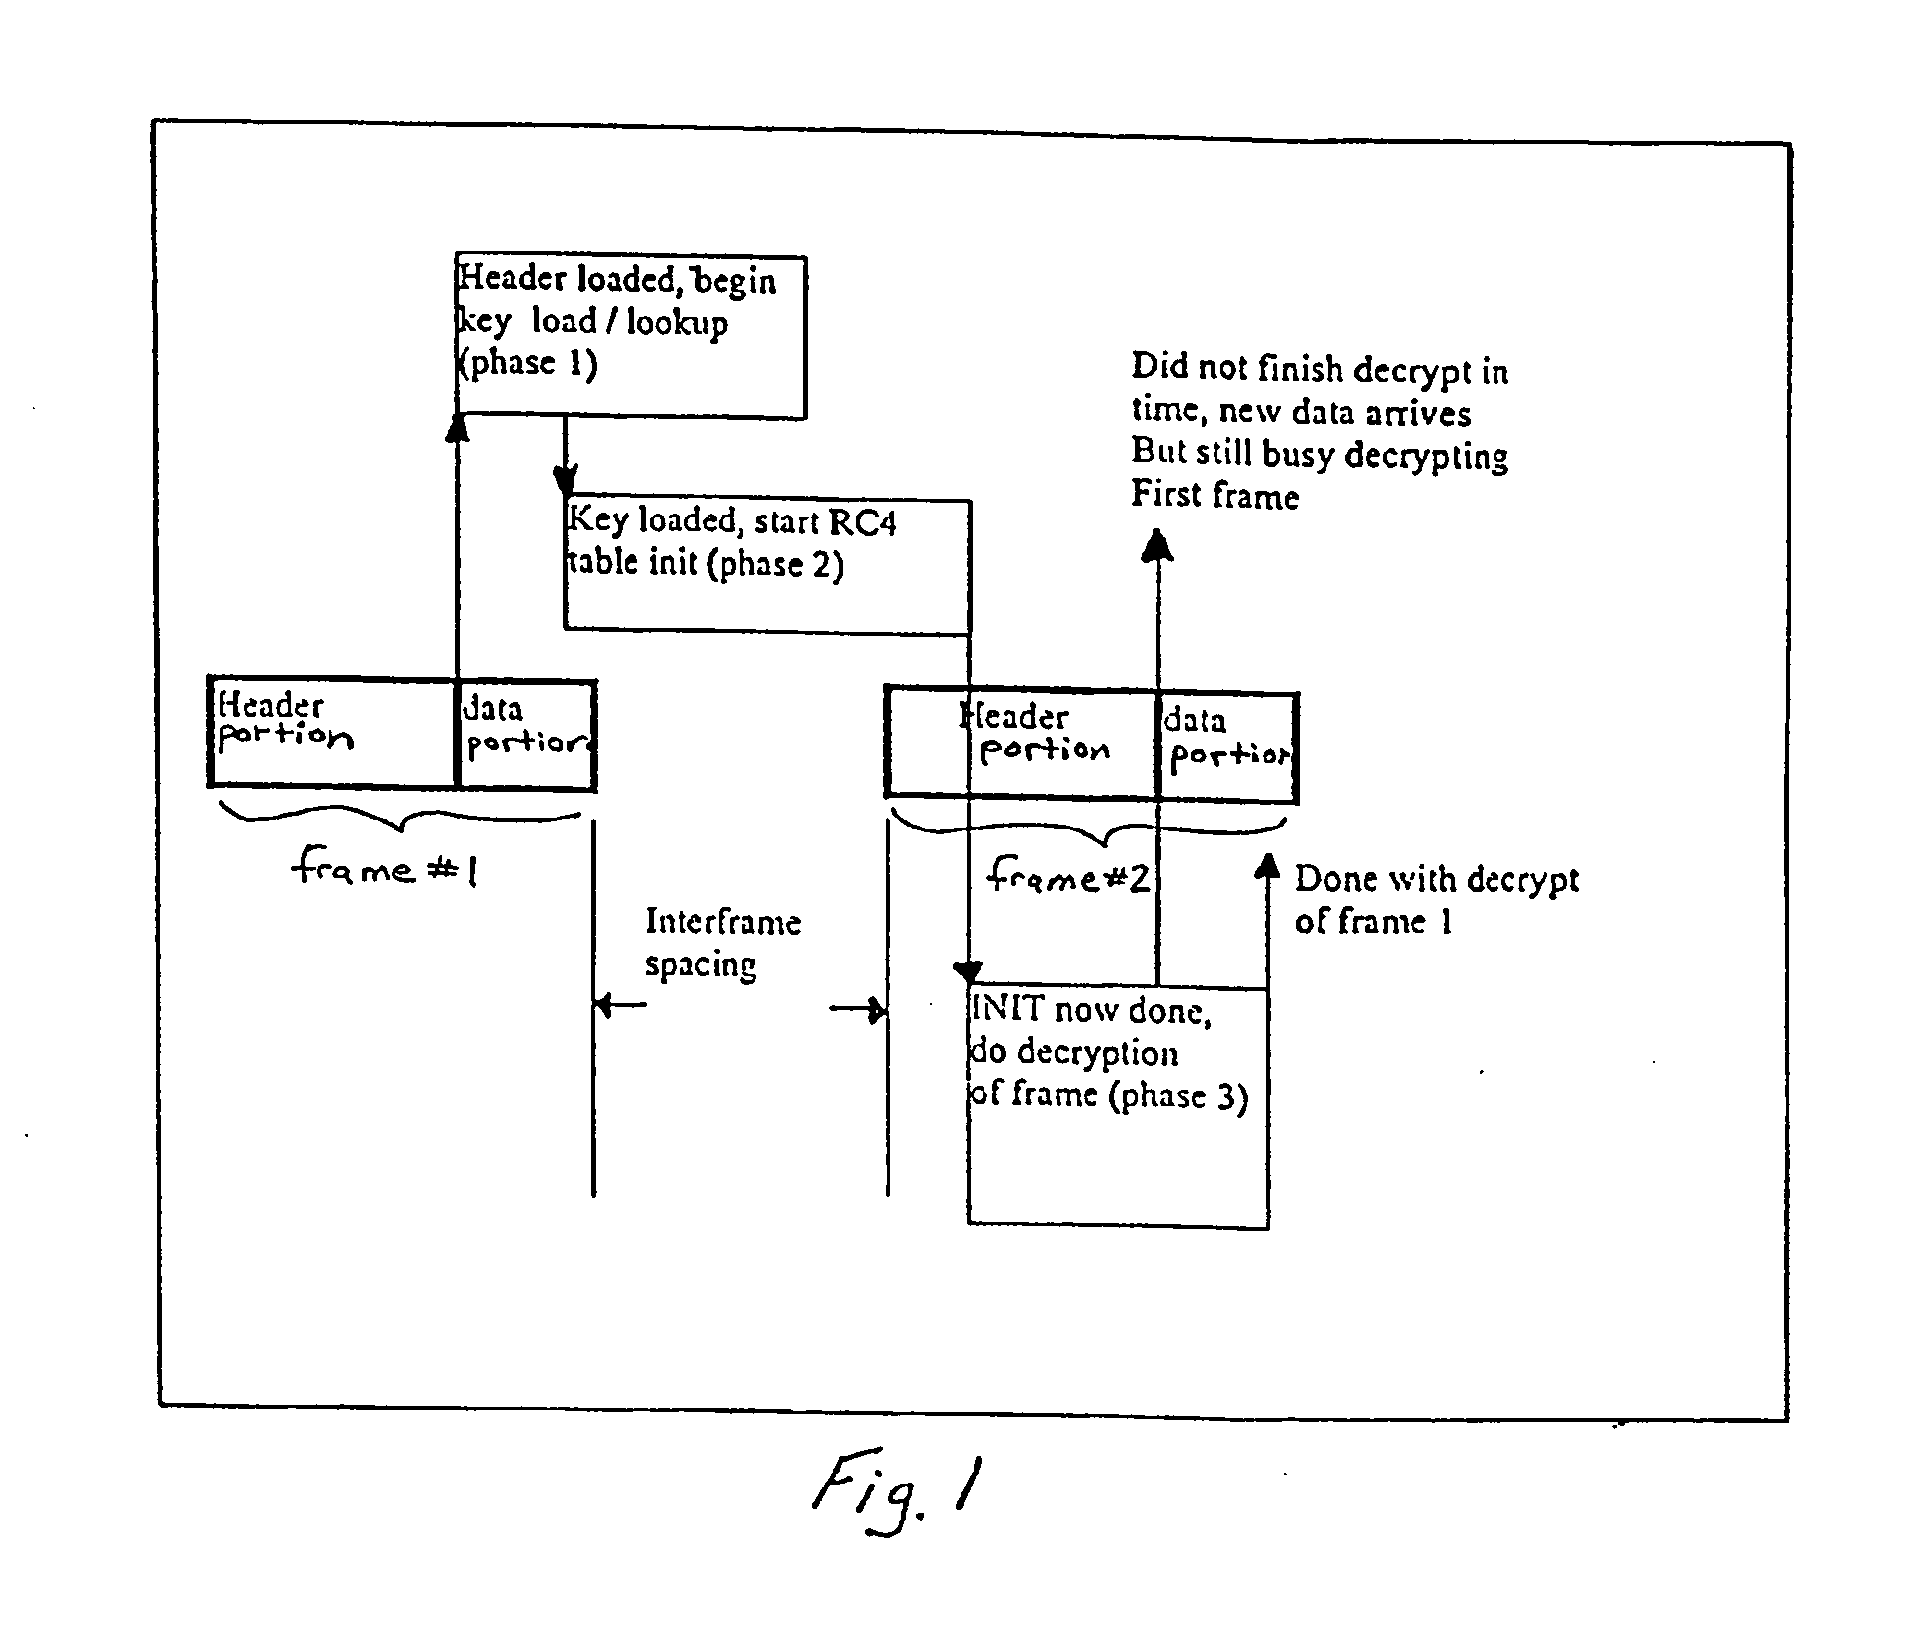 Hardware-based encryption/decryption employing dual ported memory and fast table initialization